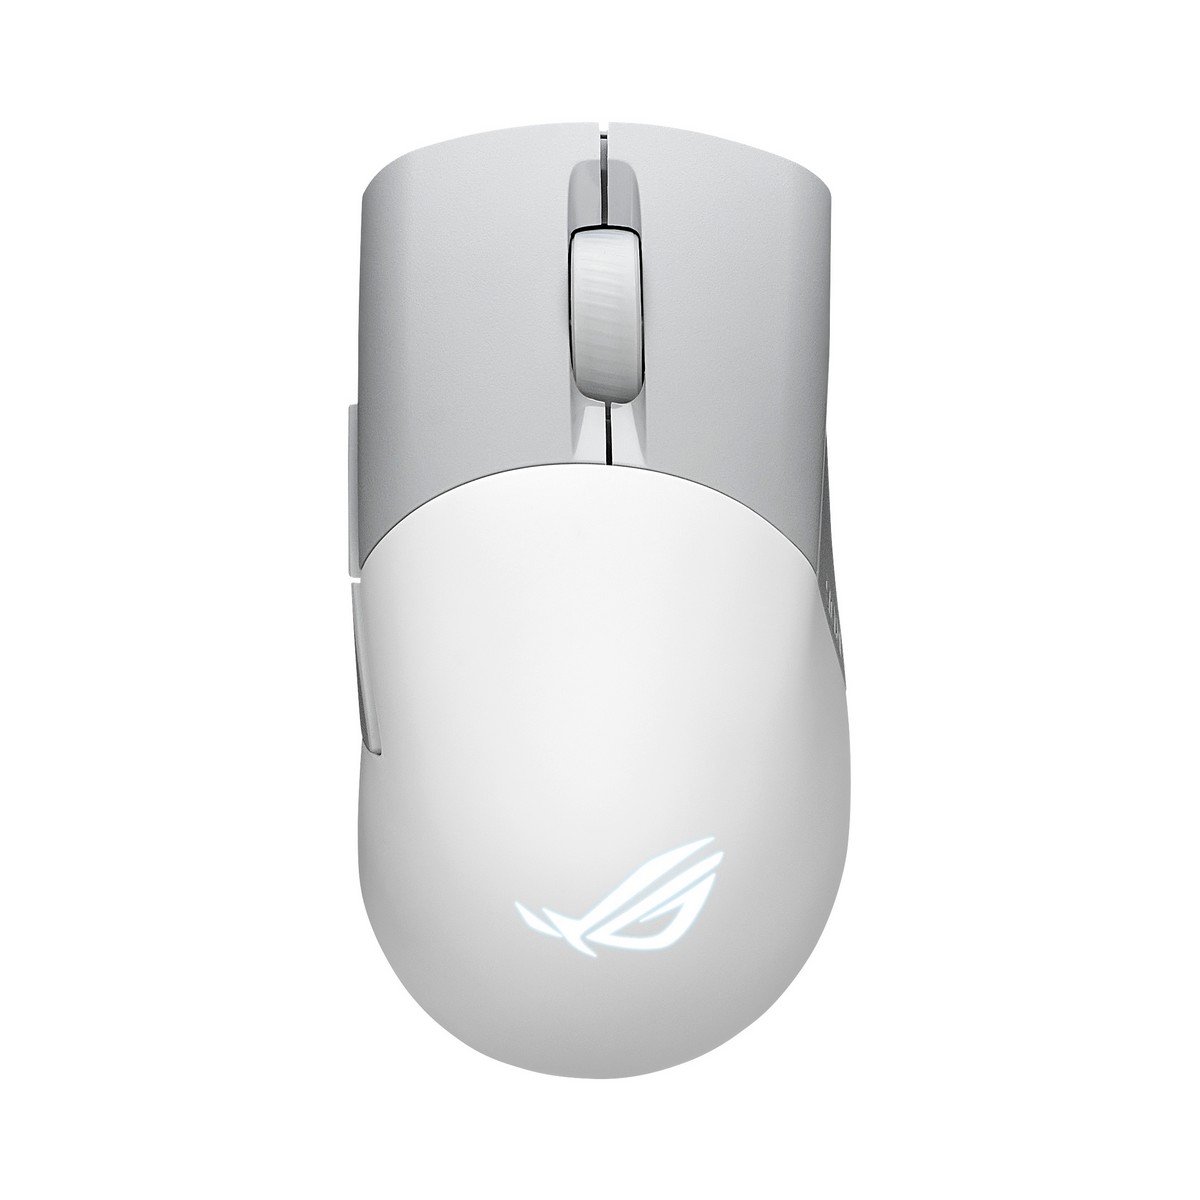 ASUS ROG Keris Wireless Aimpoint Wireless Gaming Mouse - White (90MP02V0-BMUA10)